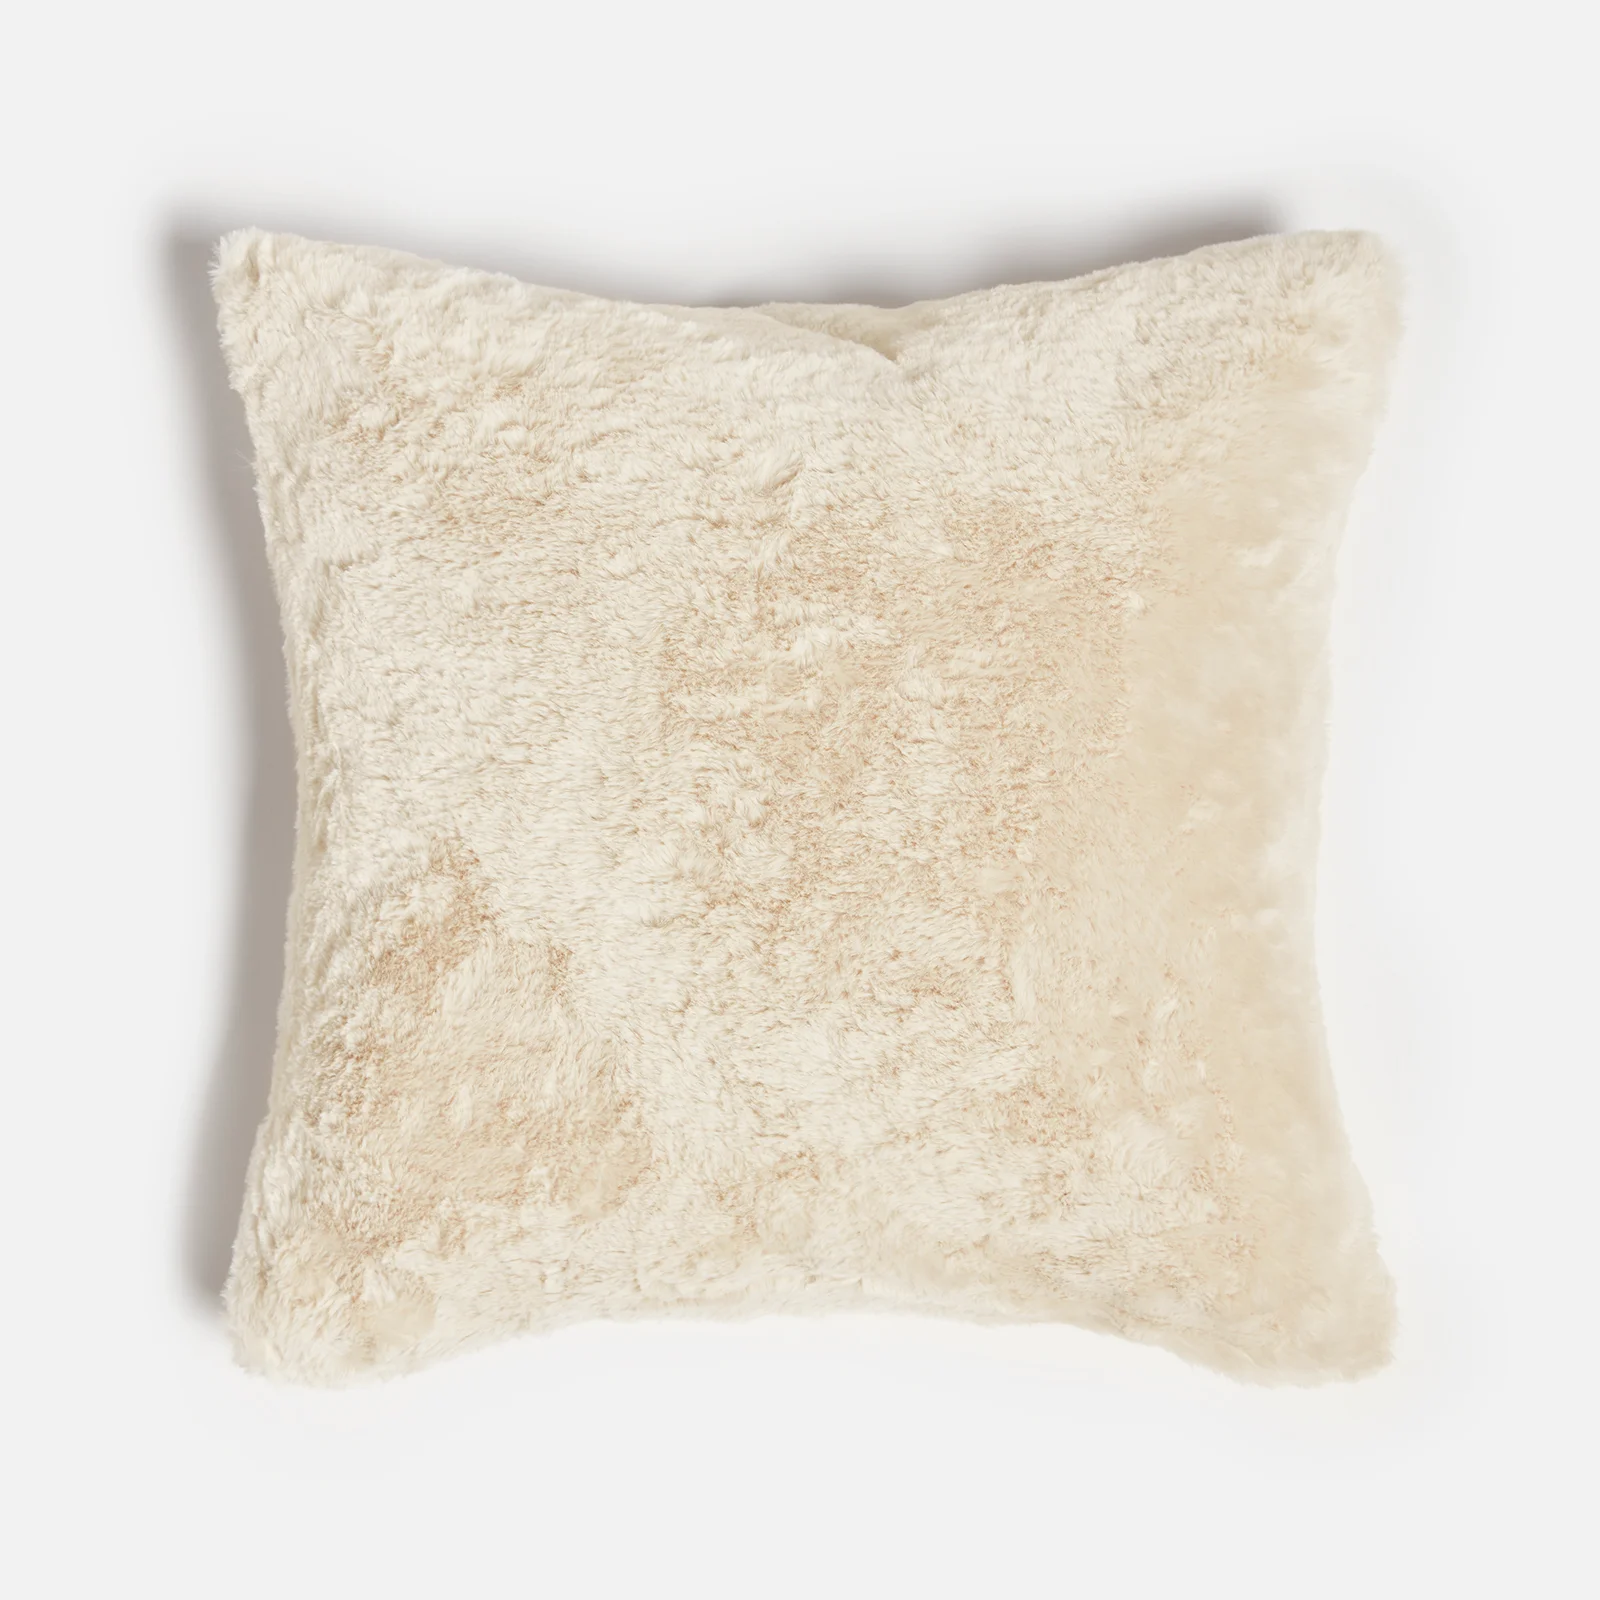 ïn home Recycled Polyester Faux Fur Cushion - Ivory Image 1